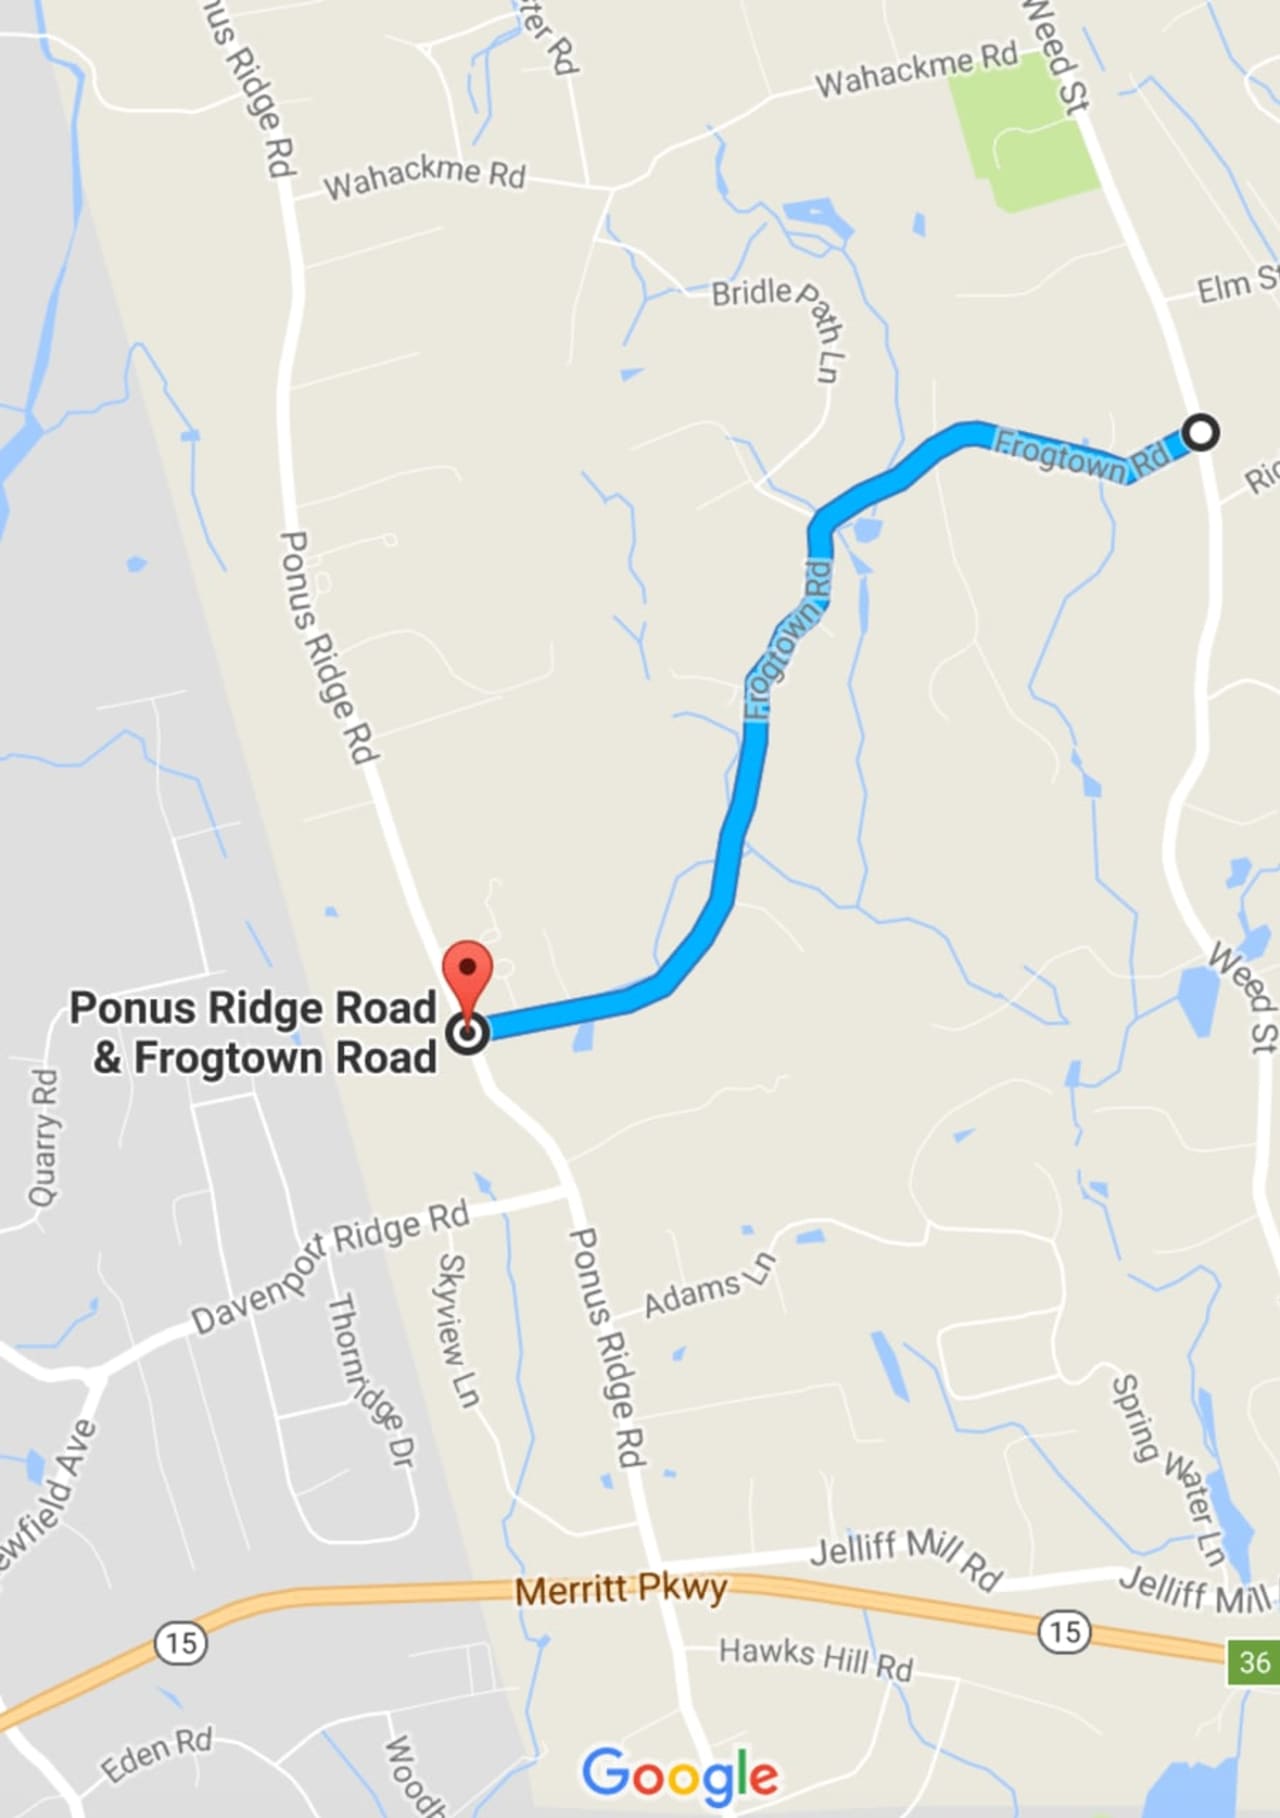 Avoid Frogtown Road in New Canaan on Monday: It is closed for an emergency pipe repair.